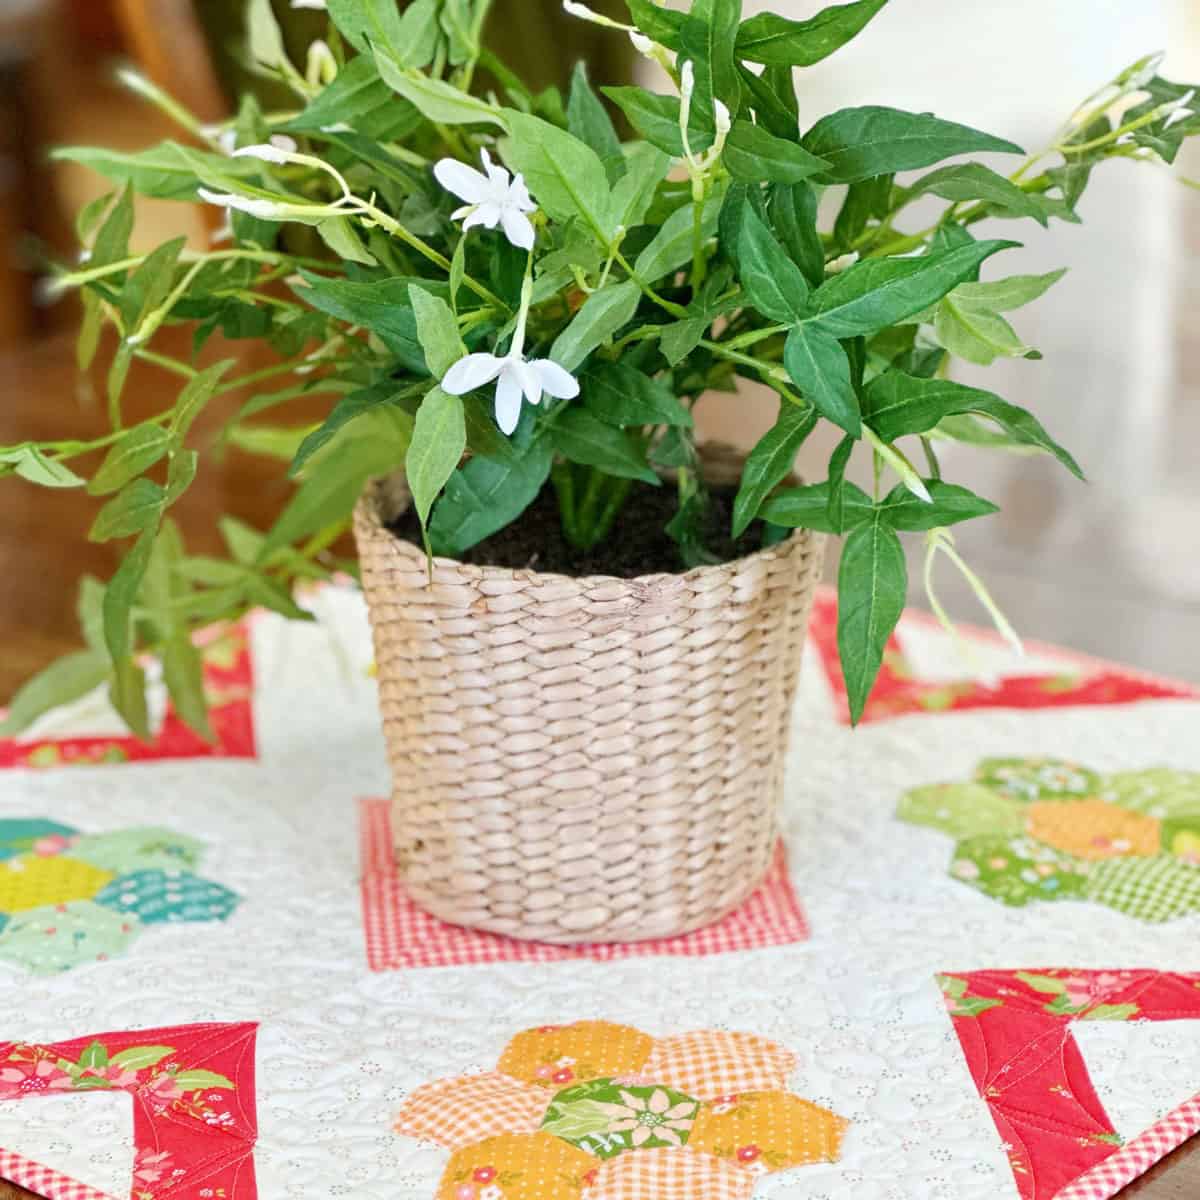 Table topper featuring Grandmother's Flower Garden blocks in bright colors with green plant in basket on top.